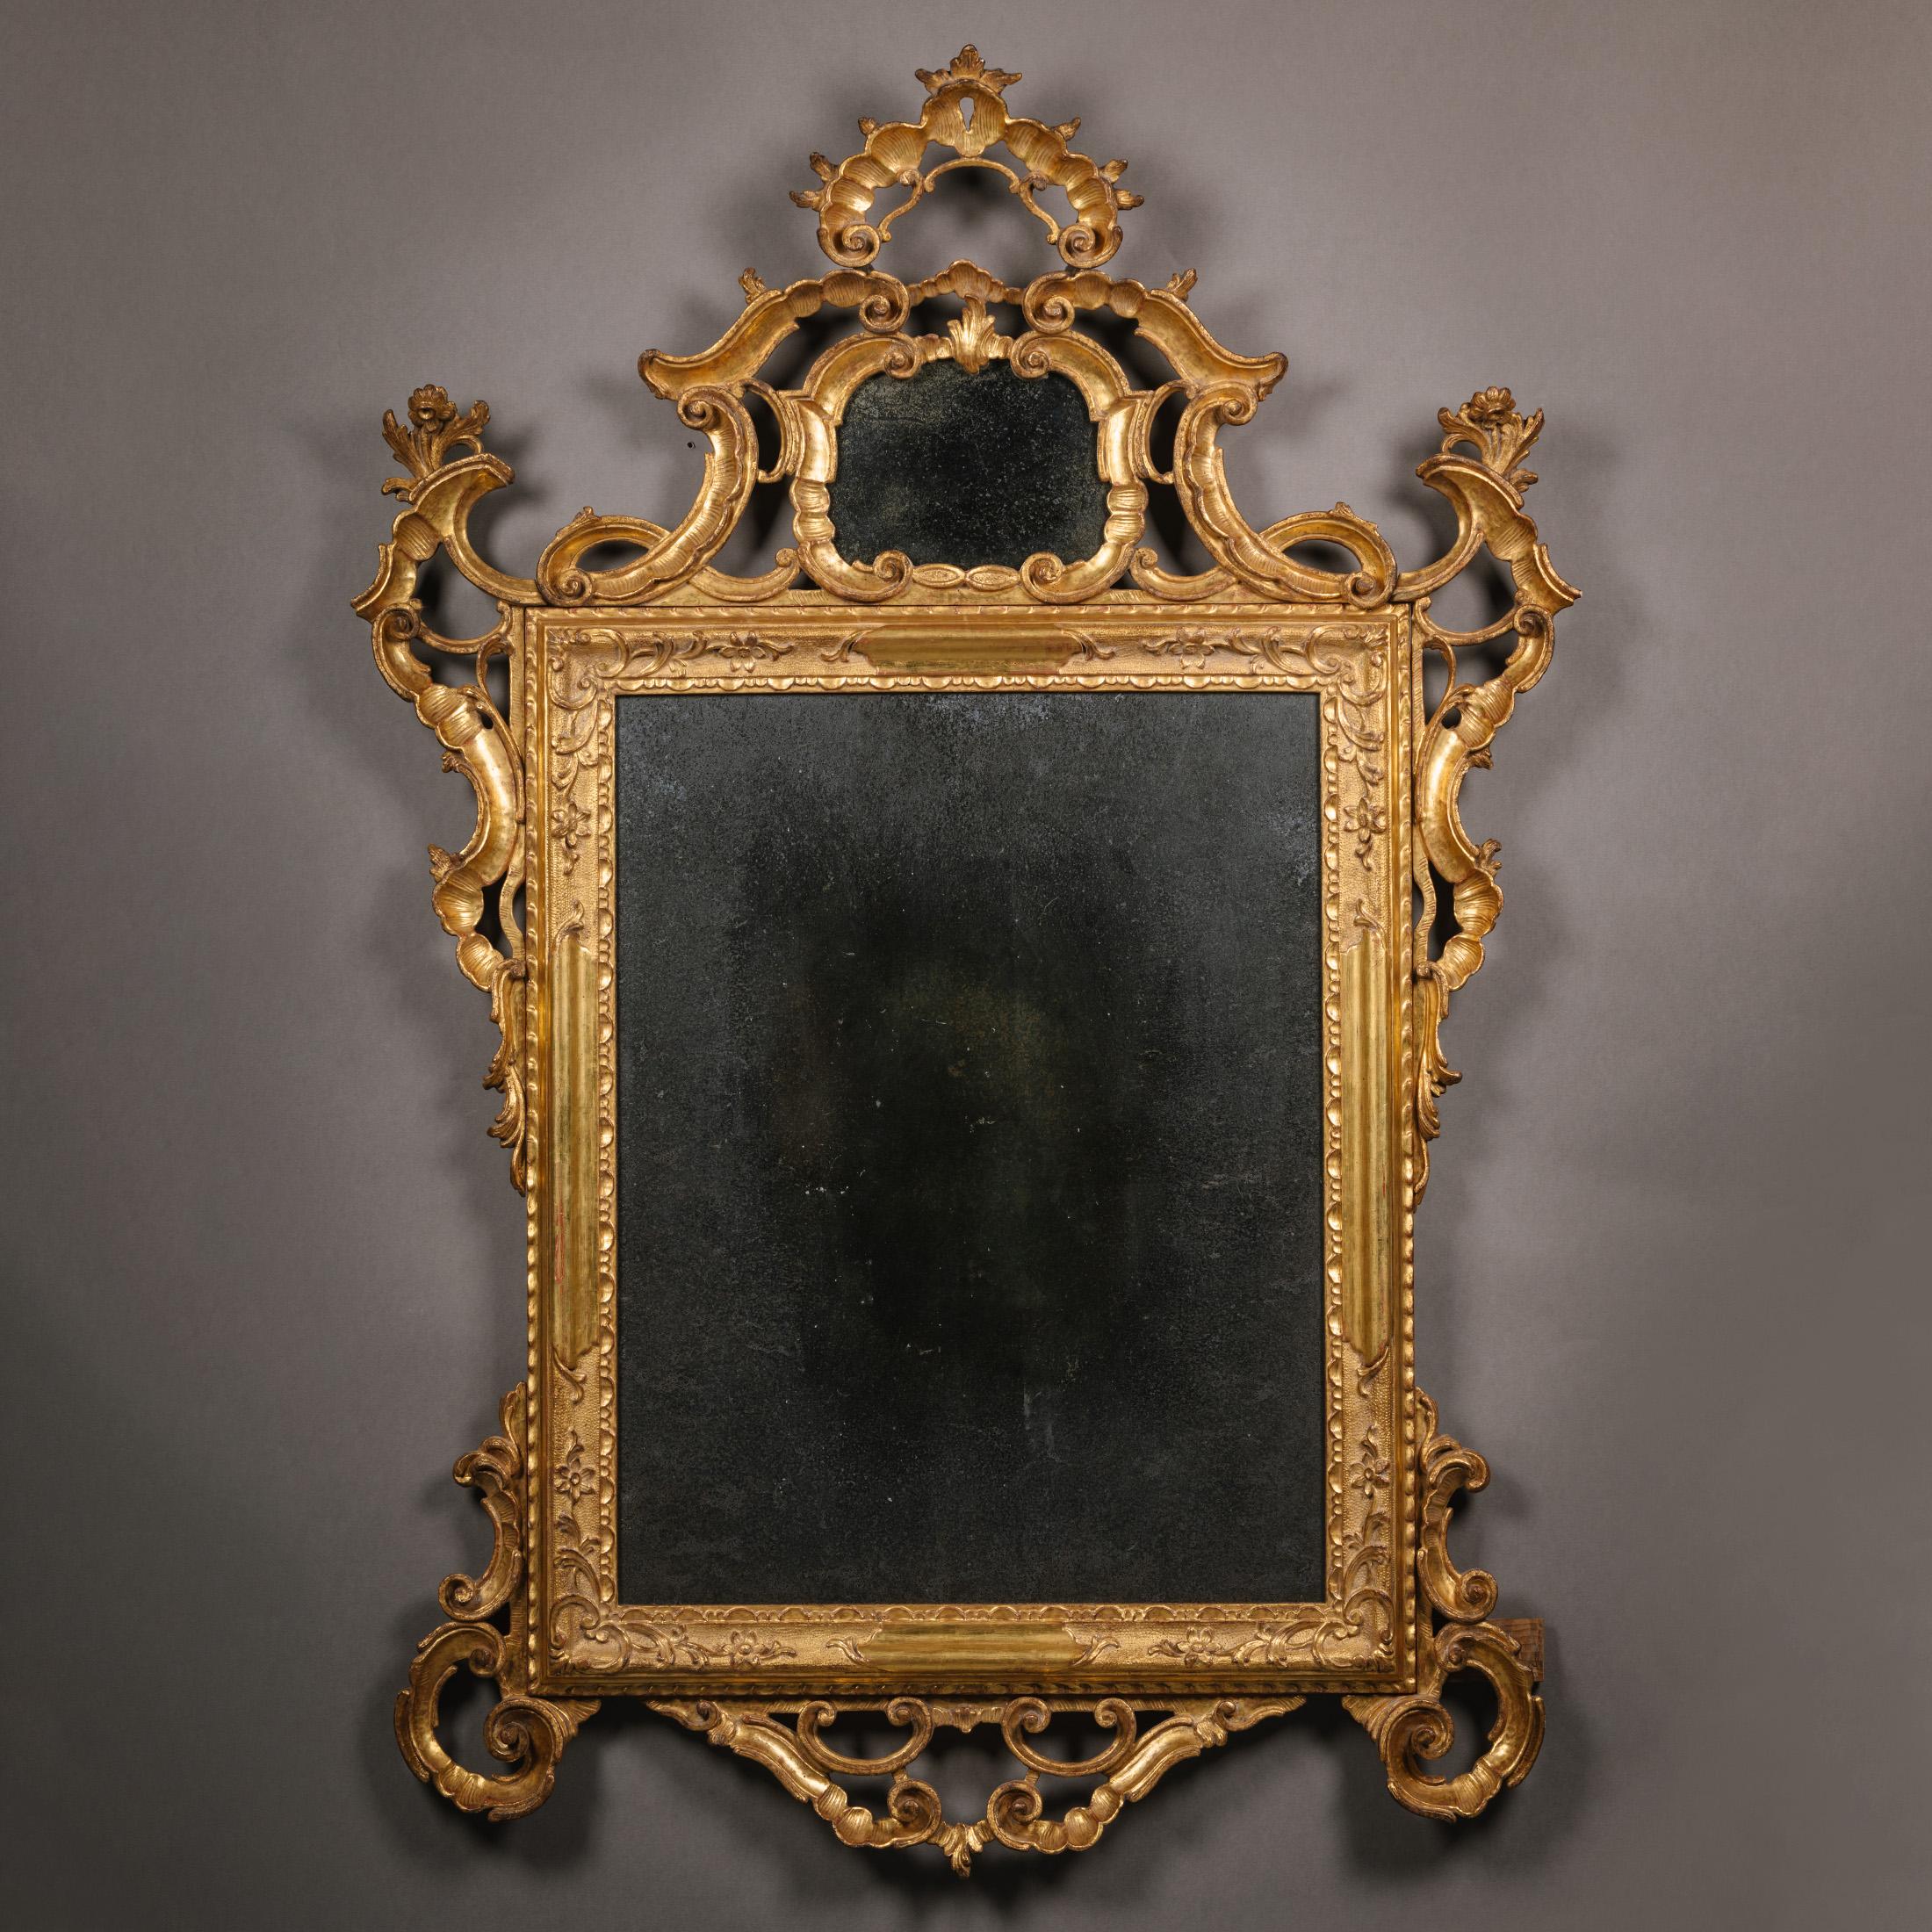 A Pair of Venetian Rococo Carved Giltwood Mirrors.  

These mirrors have elaborate pierced strapwork crestings surmounted by a shell-shaped corona above a cartouche-shaped plate, the rectangular mirror plates within a carved giltwood and gilt-gesso